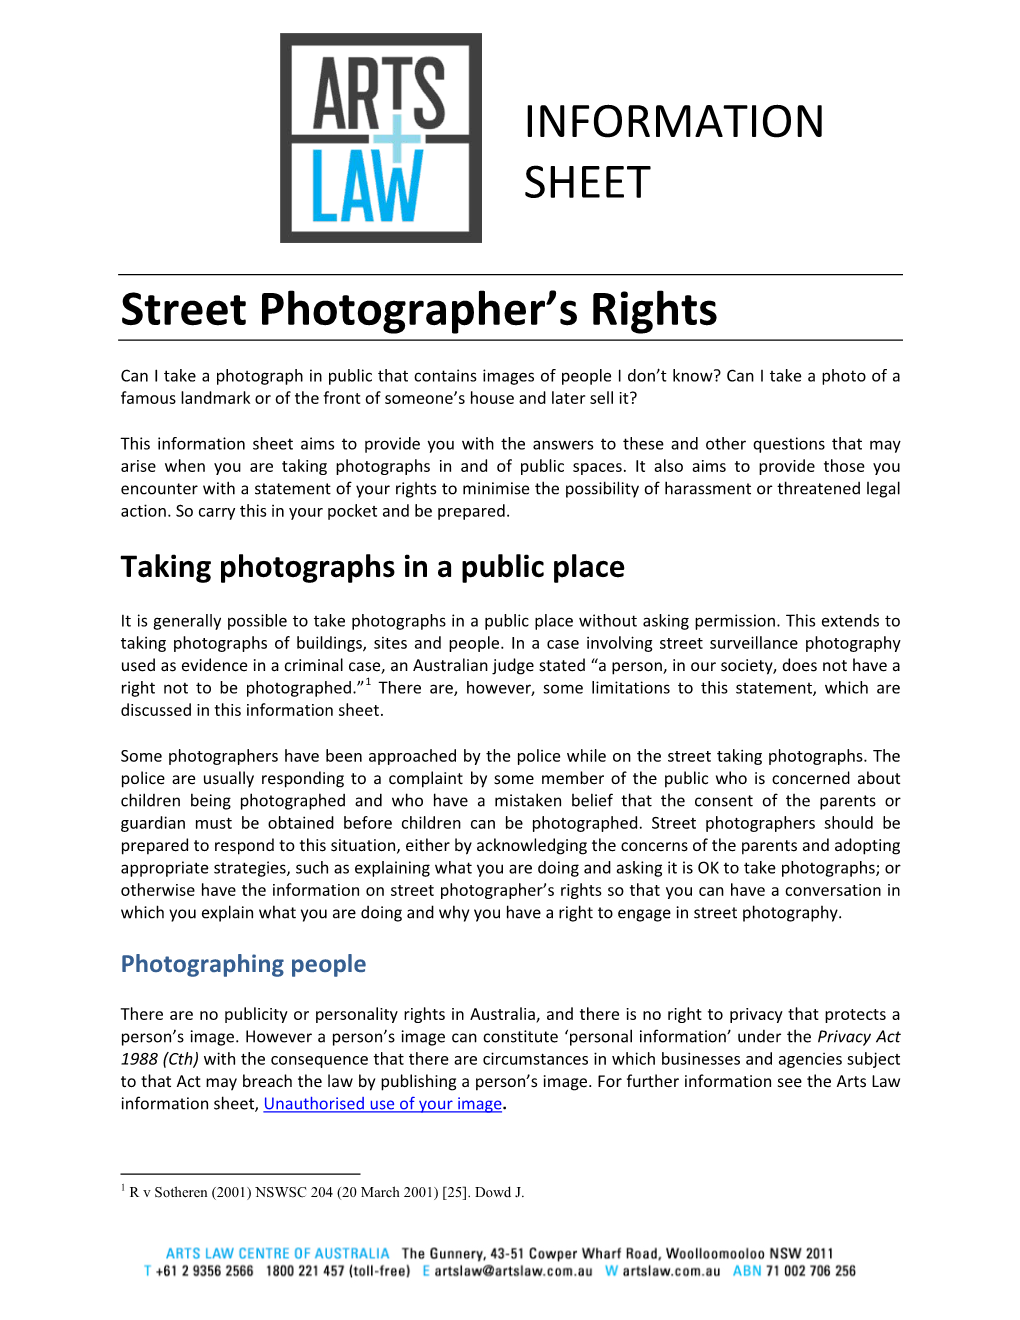 INFORMATION SHEET Street Photographer's Rights